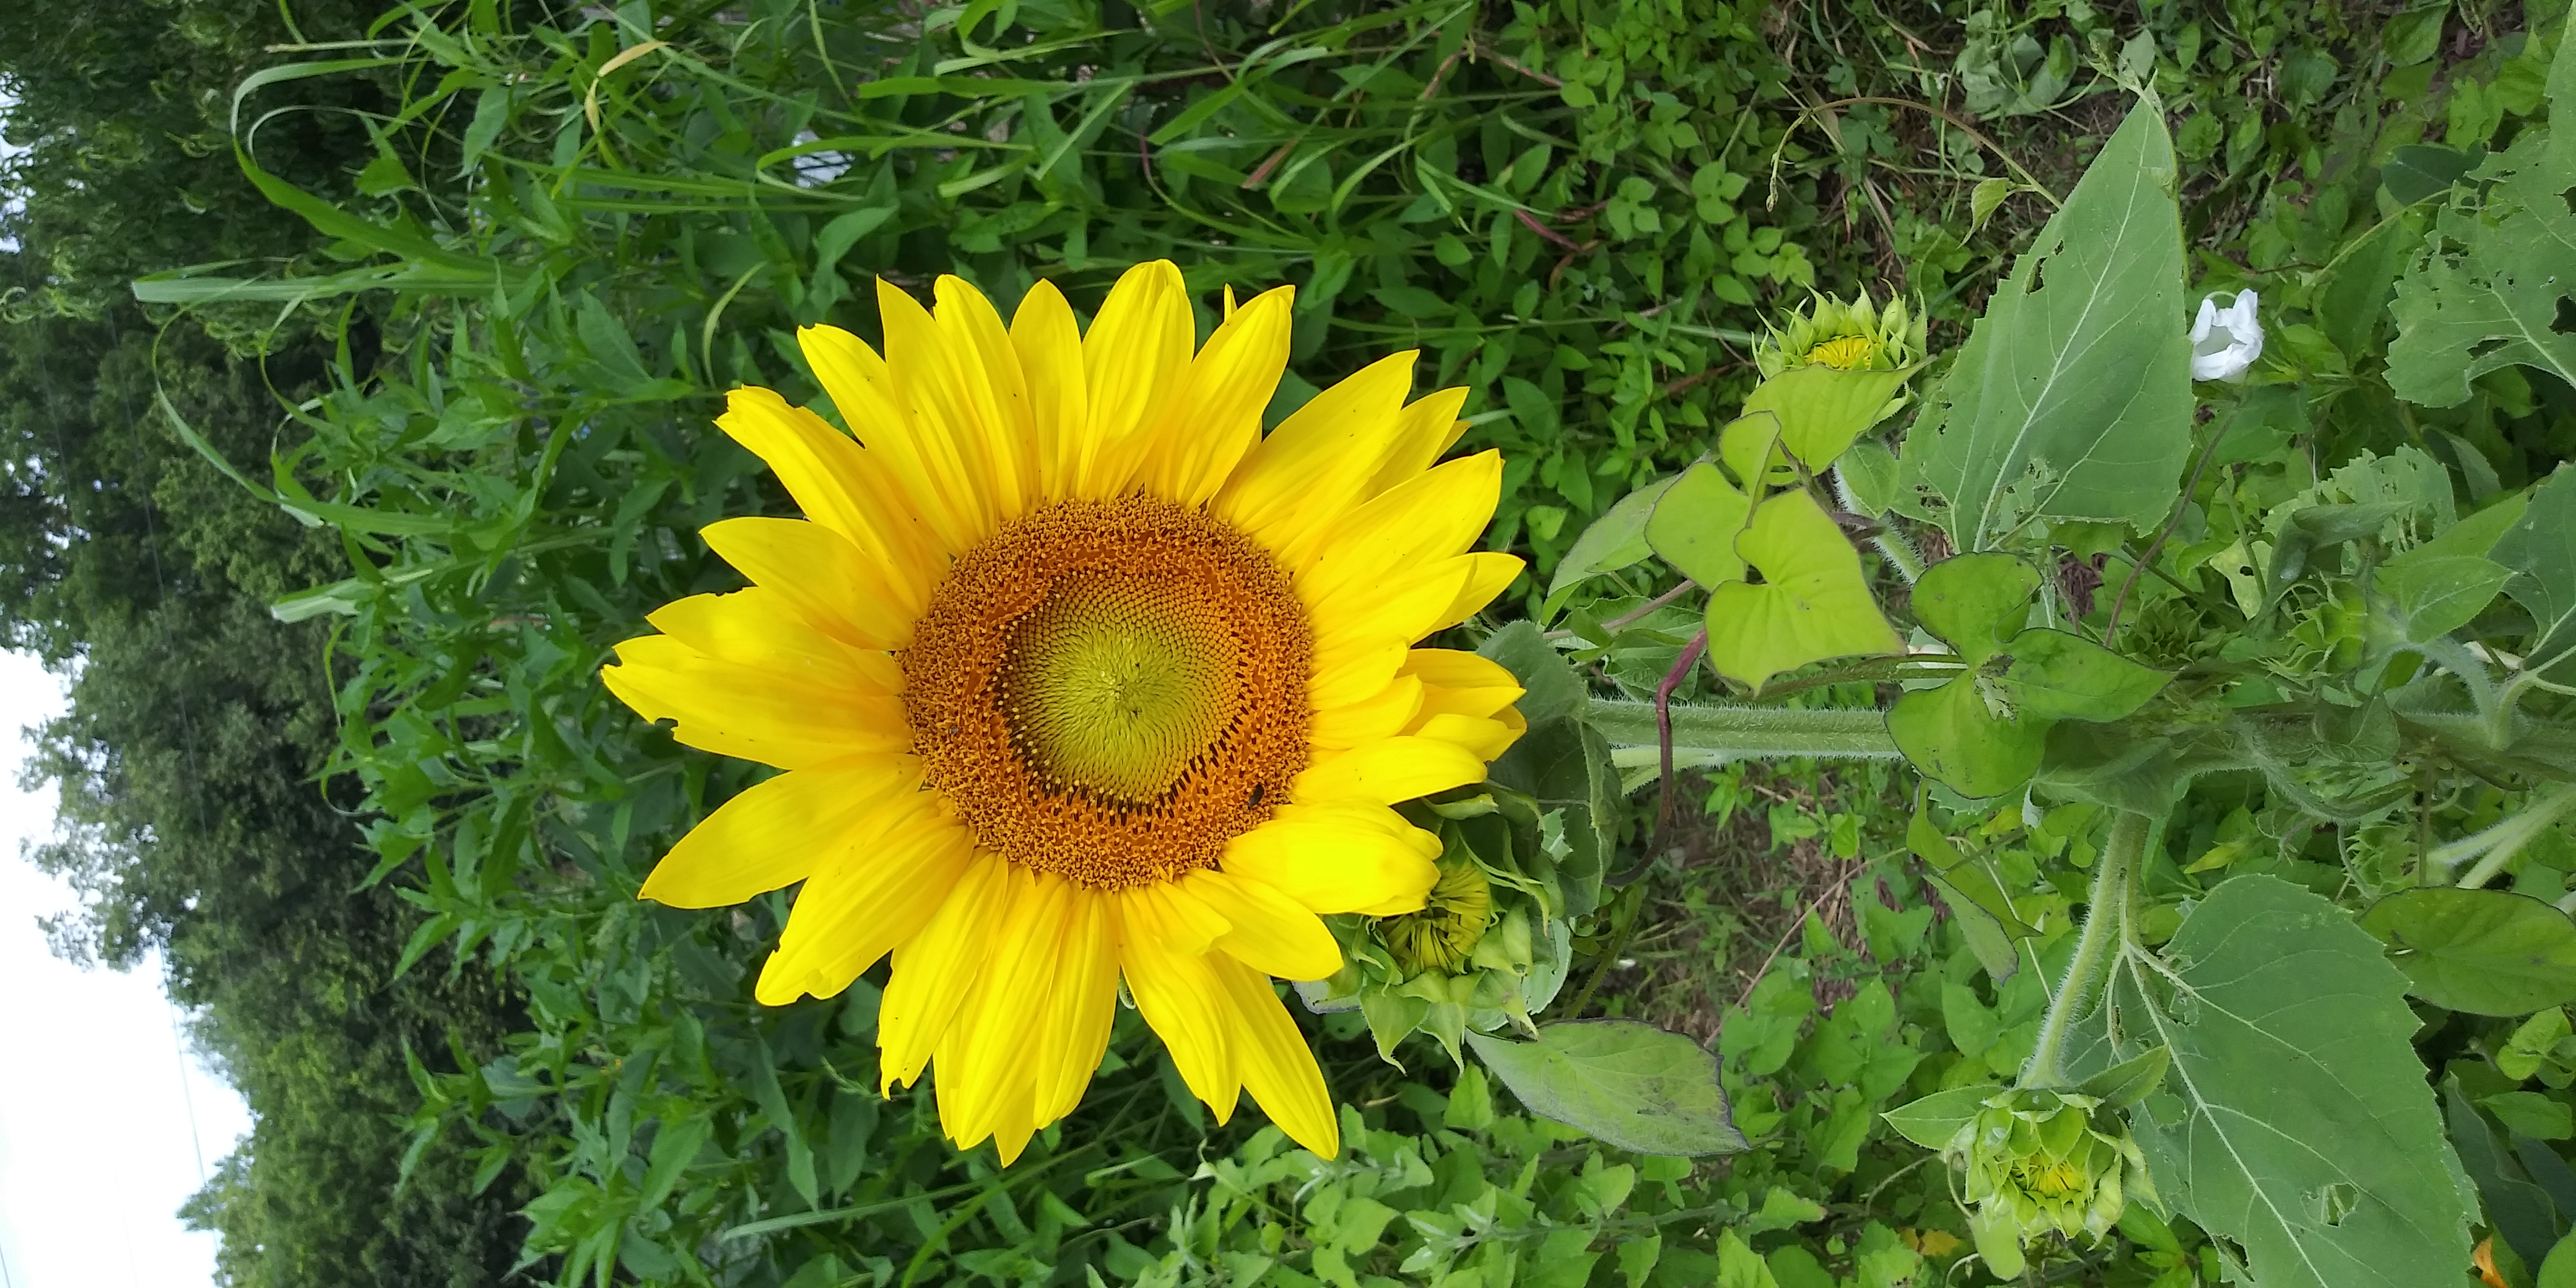 Photo of a beautiful yellow sunflower in front of a green garden background.